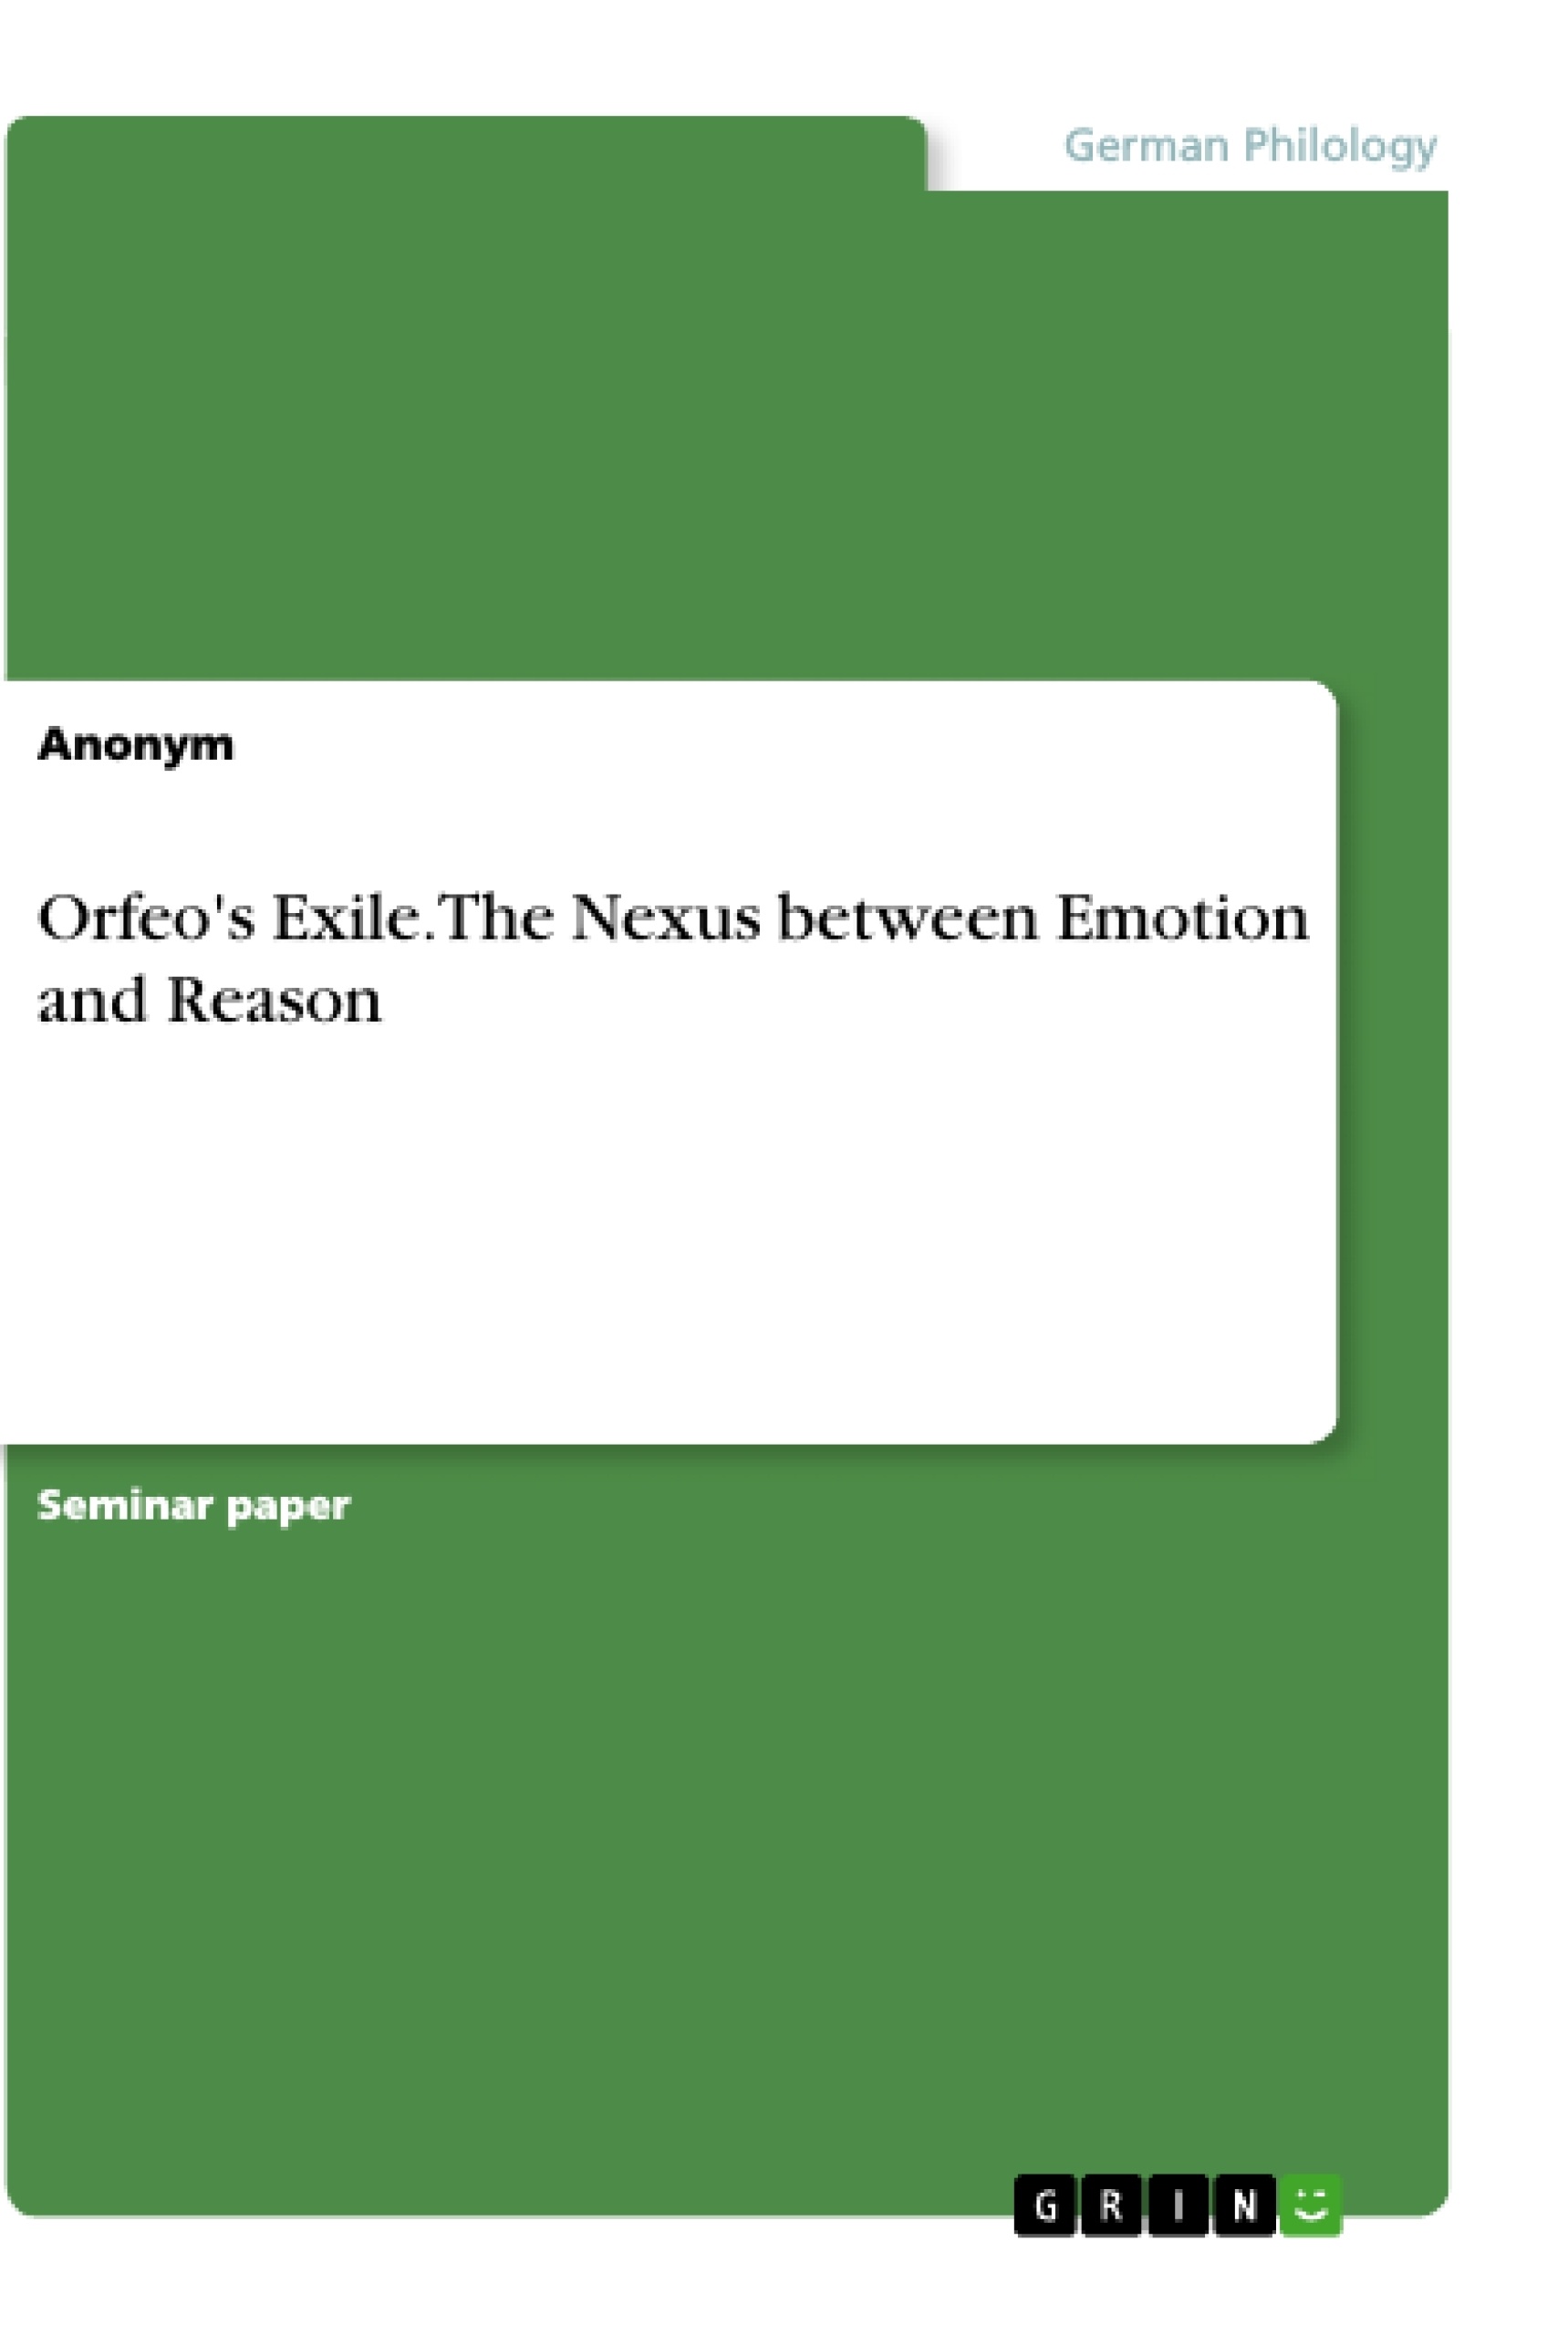 Título: Orfeo's Exile. The Nexus between Emotion and Reason